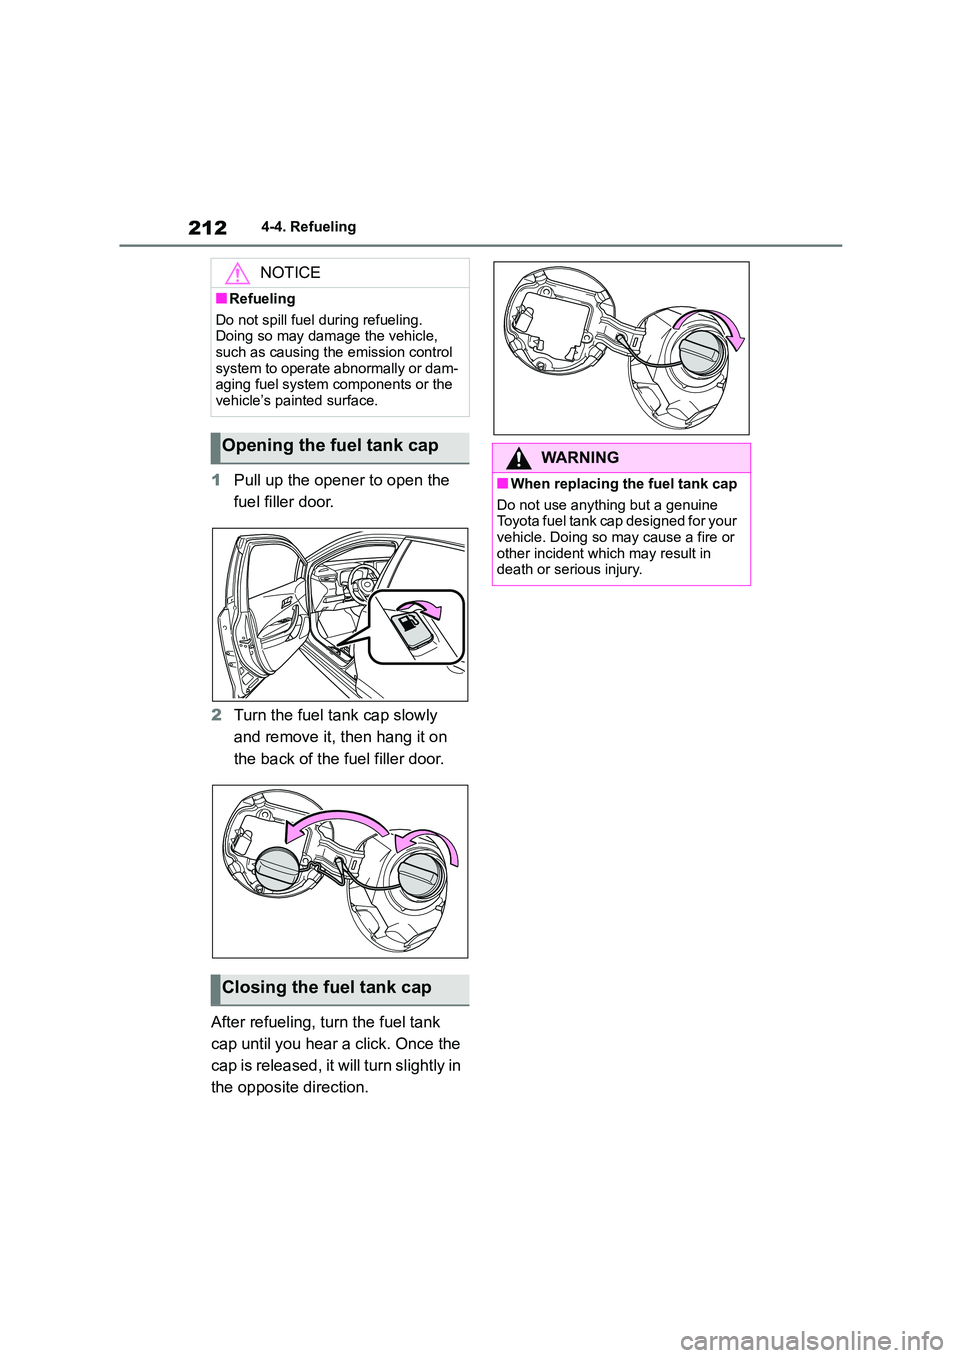 TOYOTA COROLLA HATCHBACK 2022  Owners Manual (in English) 2124-4. Refueling
1Pull up the opener to open the  
fuel filler door. 
2 Turn the fuel tank cap slowly  
and remove it, then hang it on 
the back of the fuel filler door. 
After refueling, turn the fu